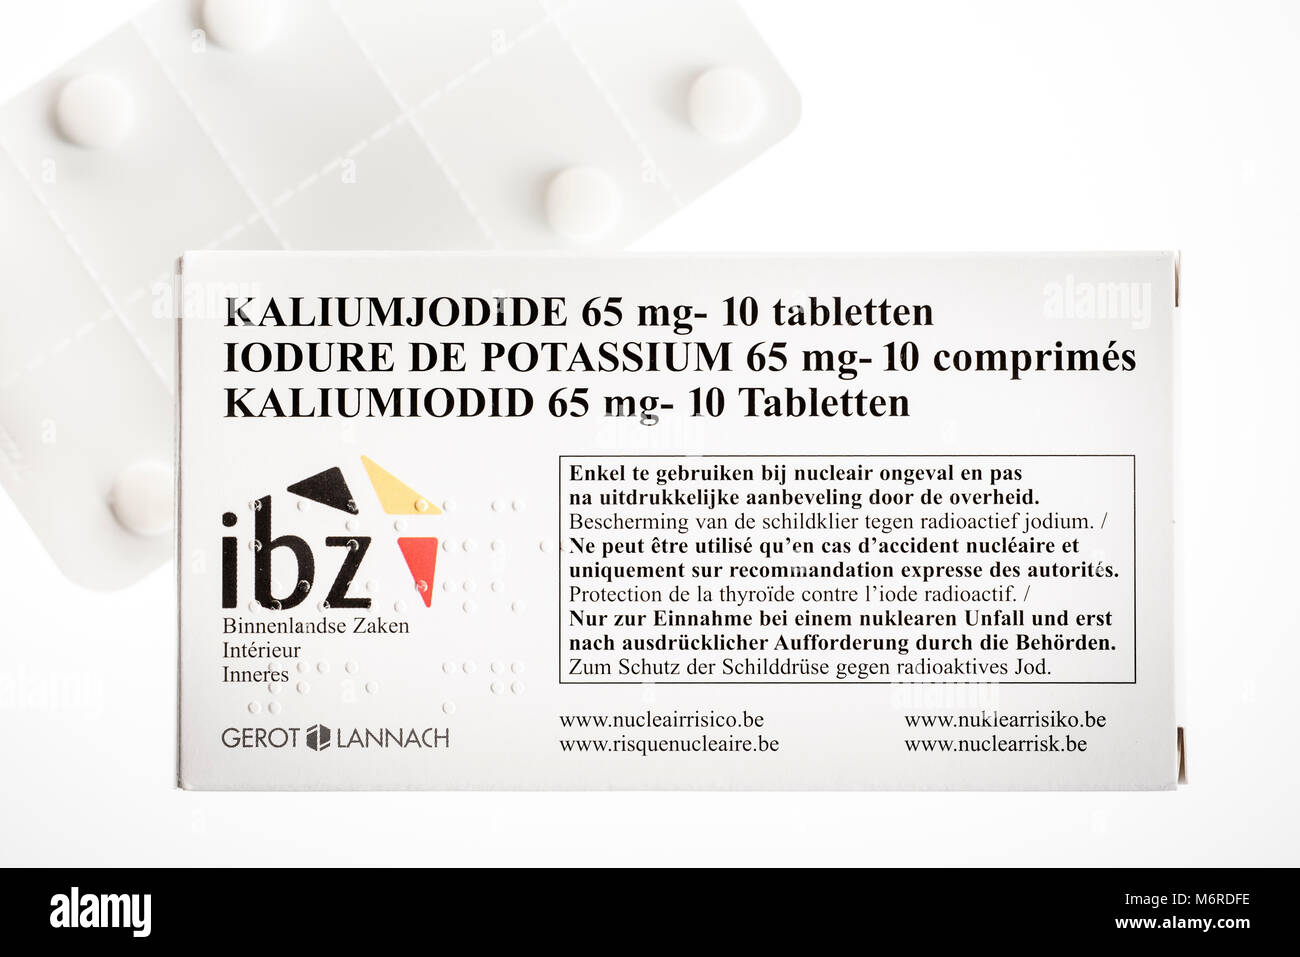 Free Potassium iodide tablets distributed to protect Belgian residents from radioactive fall-out in the event of a nuclear accident or leak in Belgium Stock Photo